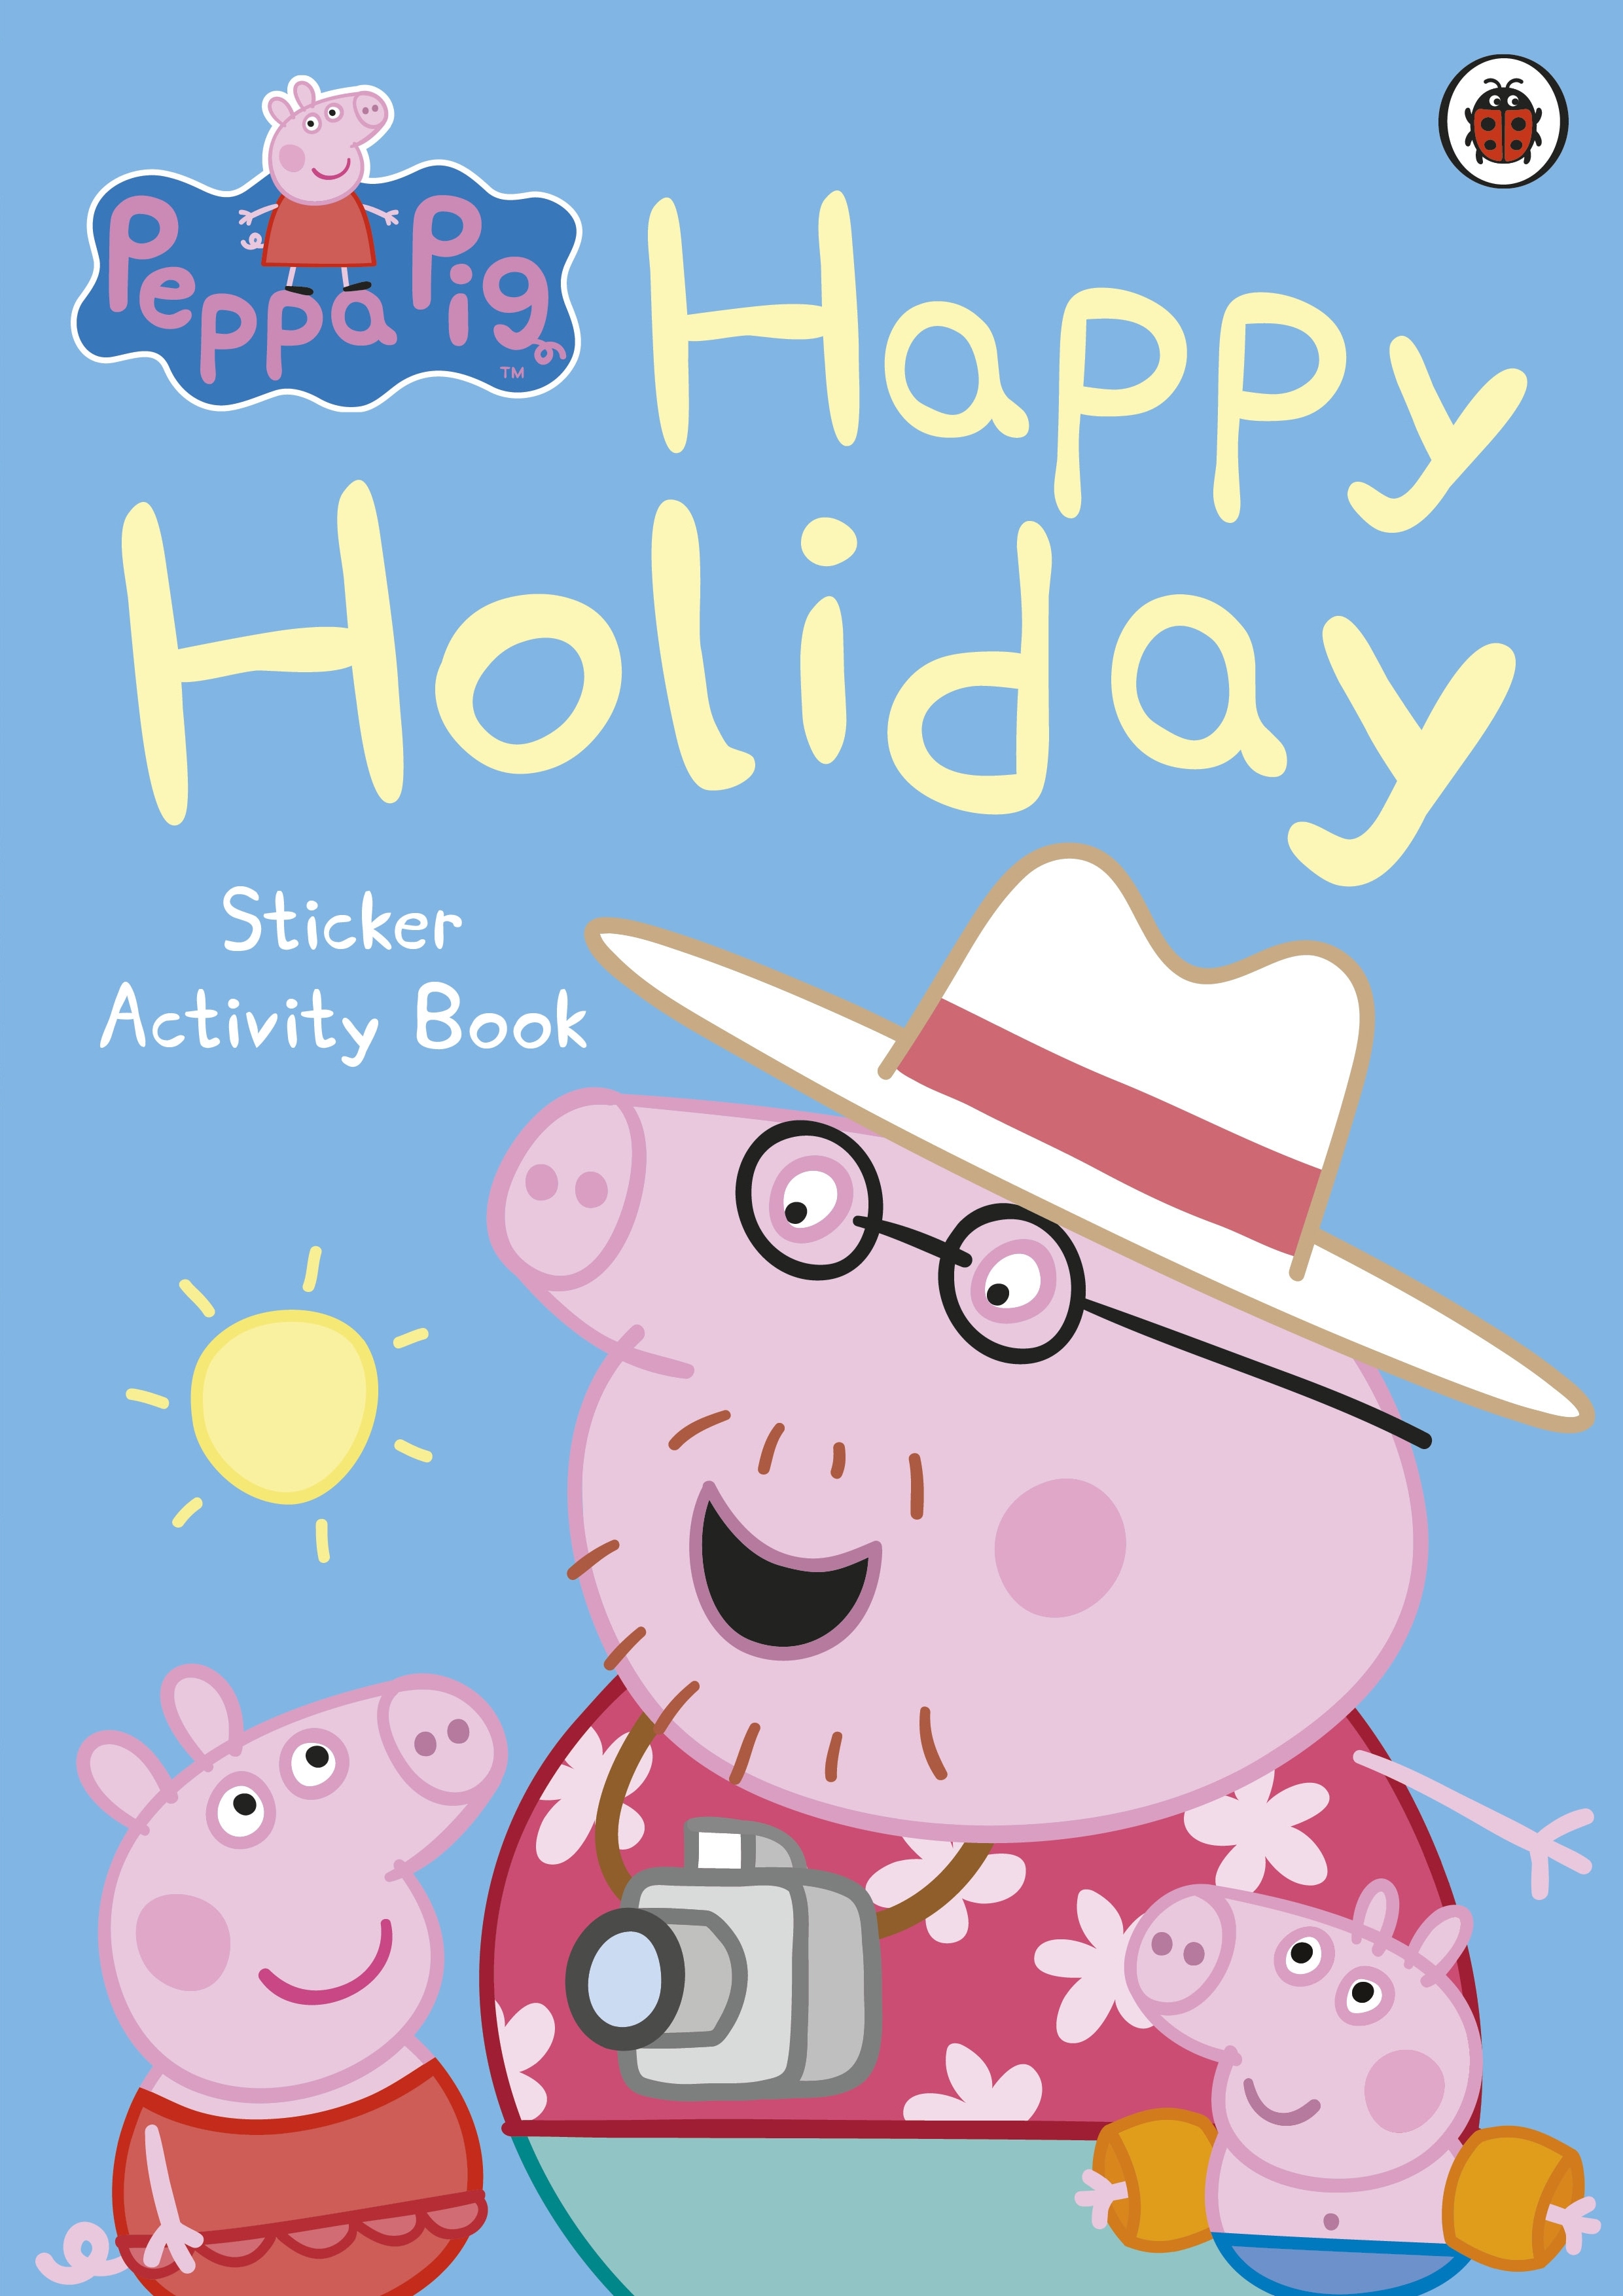 Book “Peppa Pig: Happy Holiday Sticker Activity Book” by Peppa Pig — July 4, 2013